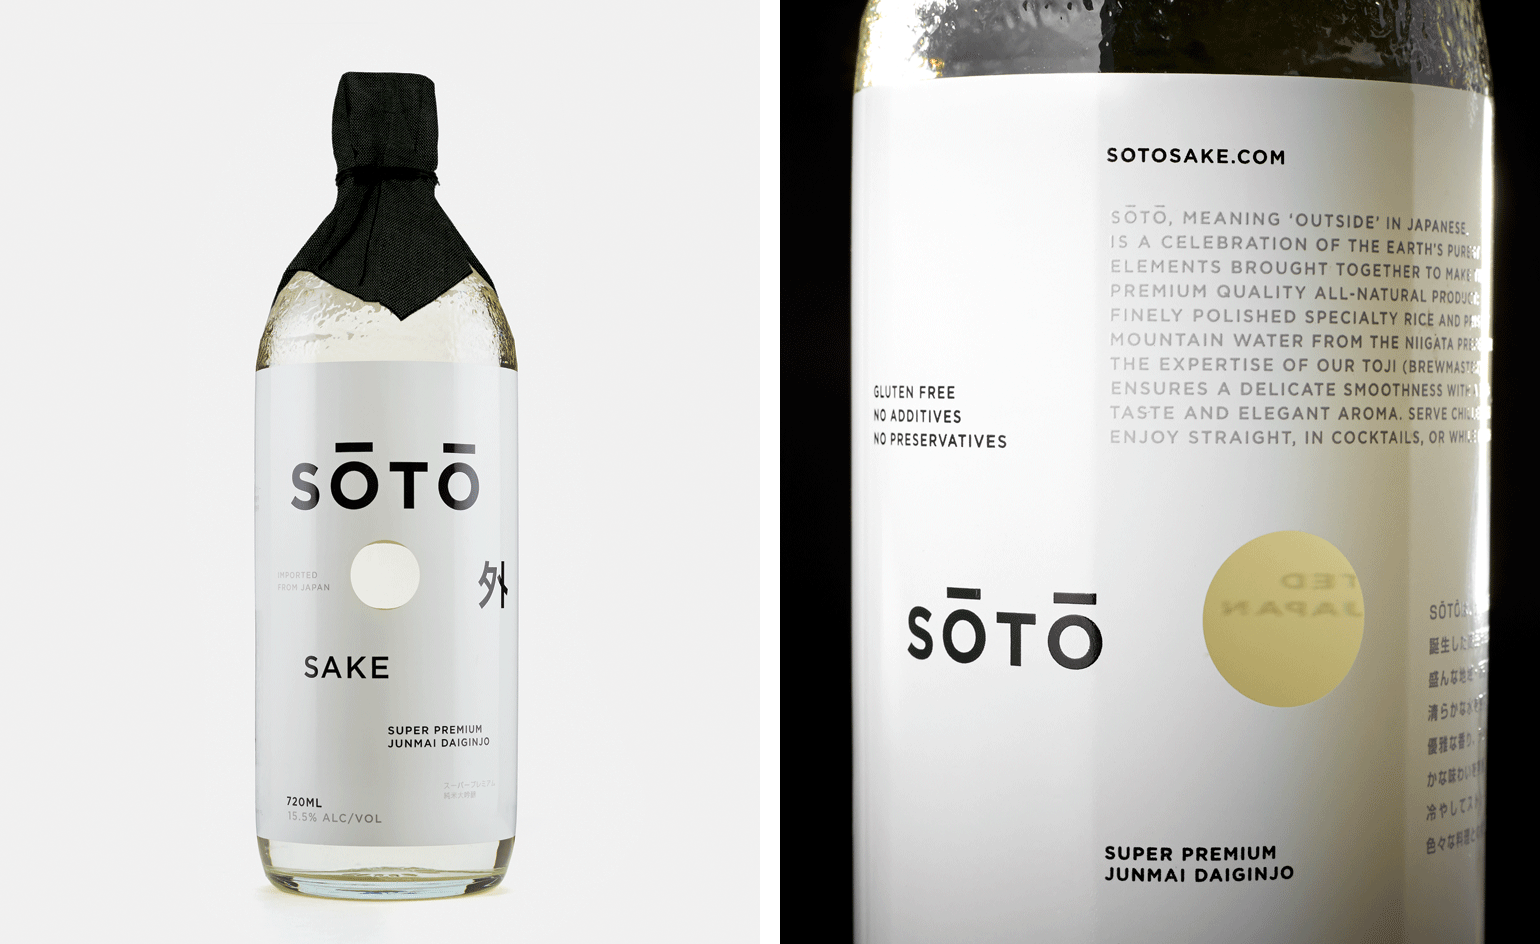 Named after the Japanese word for ‘outside’, Soto Sake’s Junmai Daiginjo sake is refined and delicate to the taste